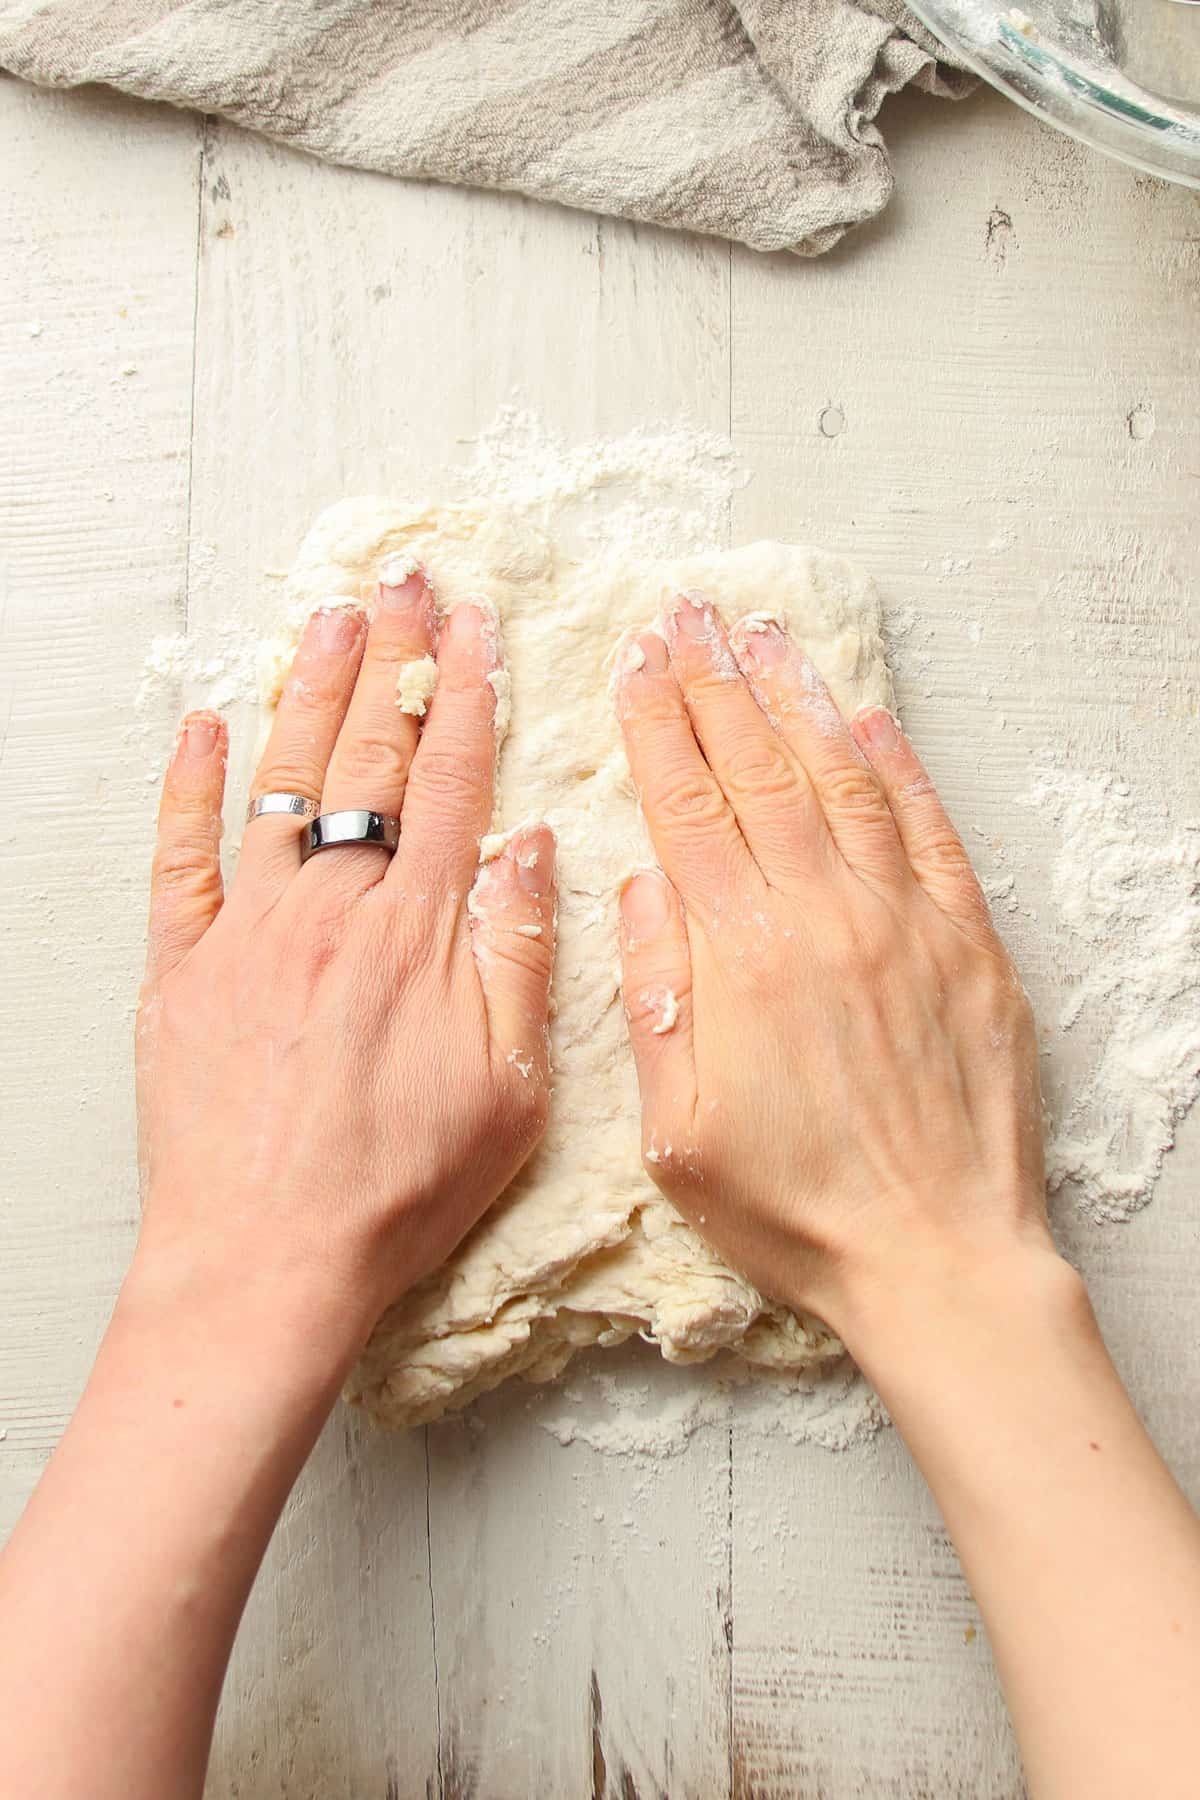 Hands flattening a square of biscuit dough.